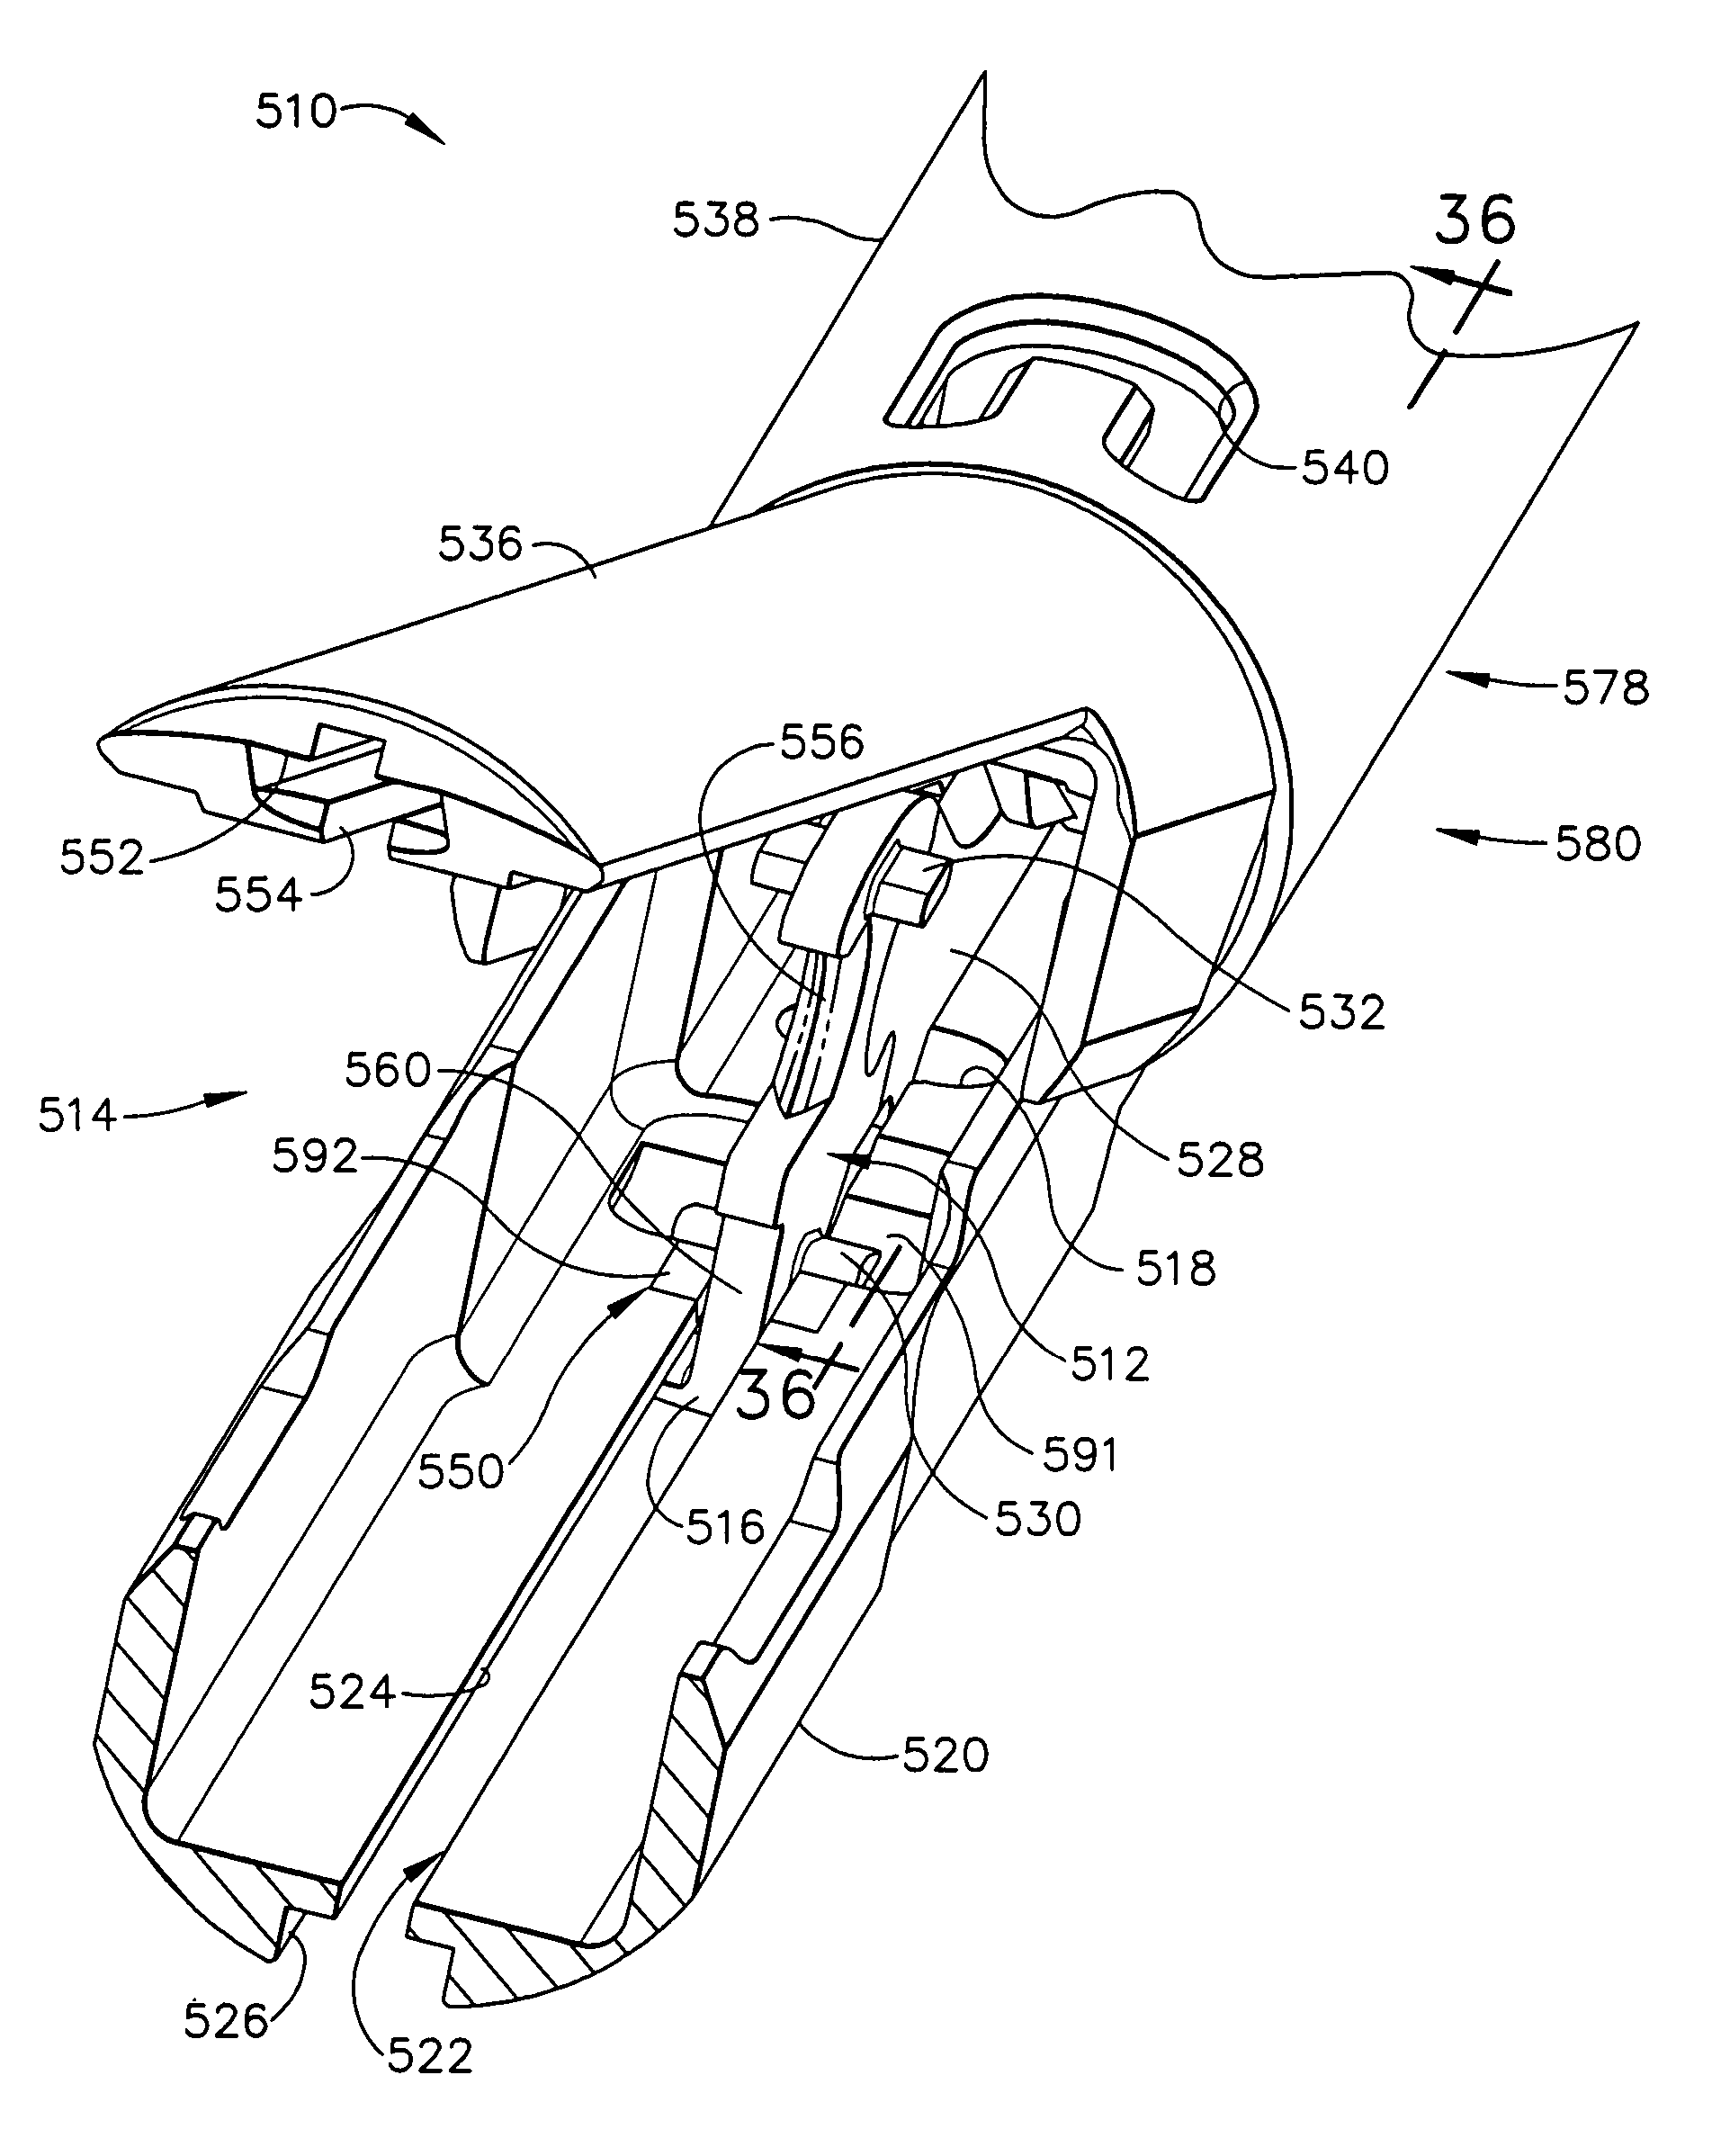 Surgical stapling instrument having an electroactive polymer actuated single lockout mechanism for prevention of firing